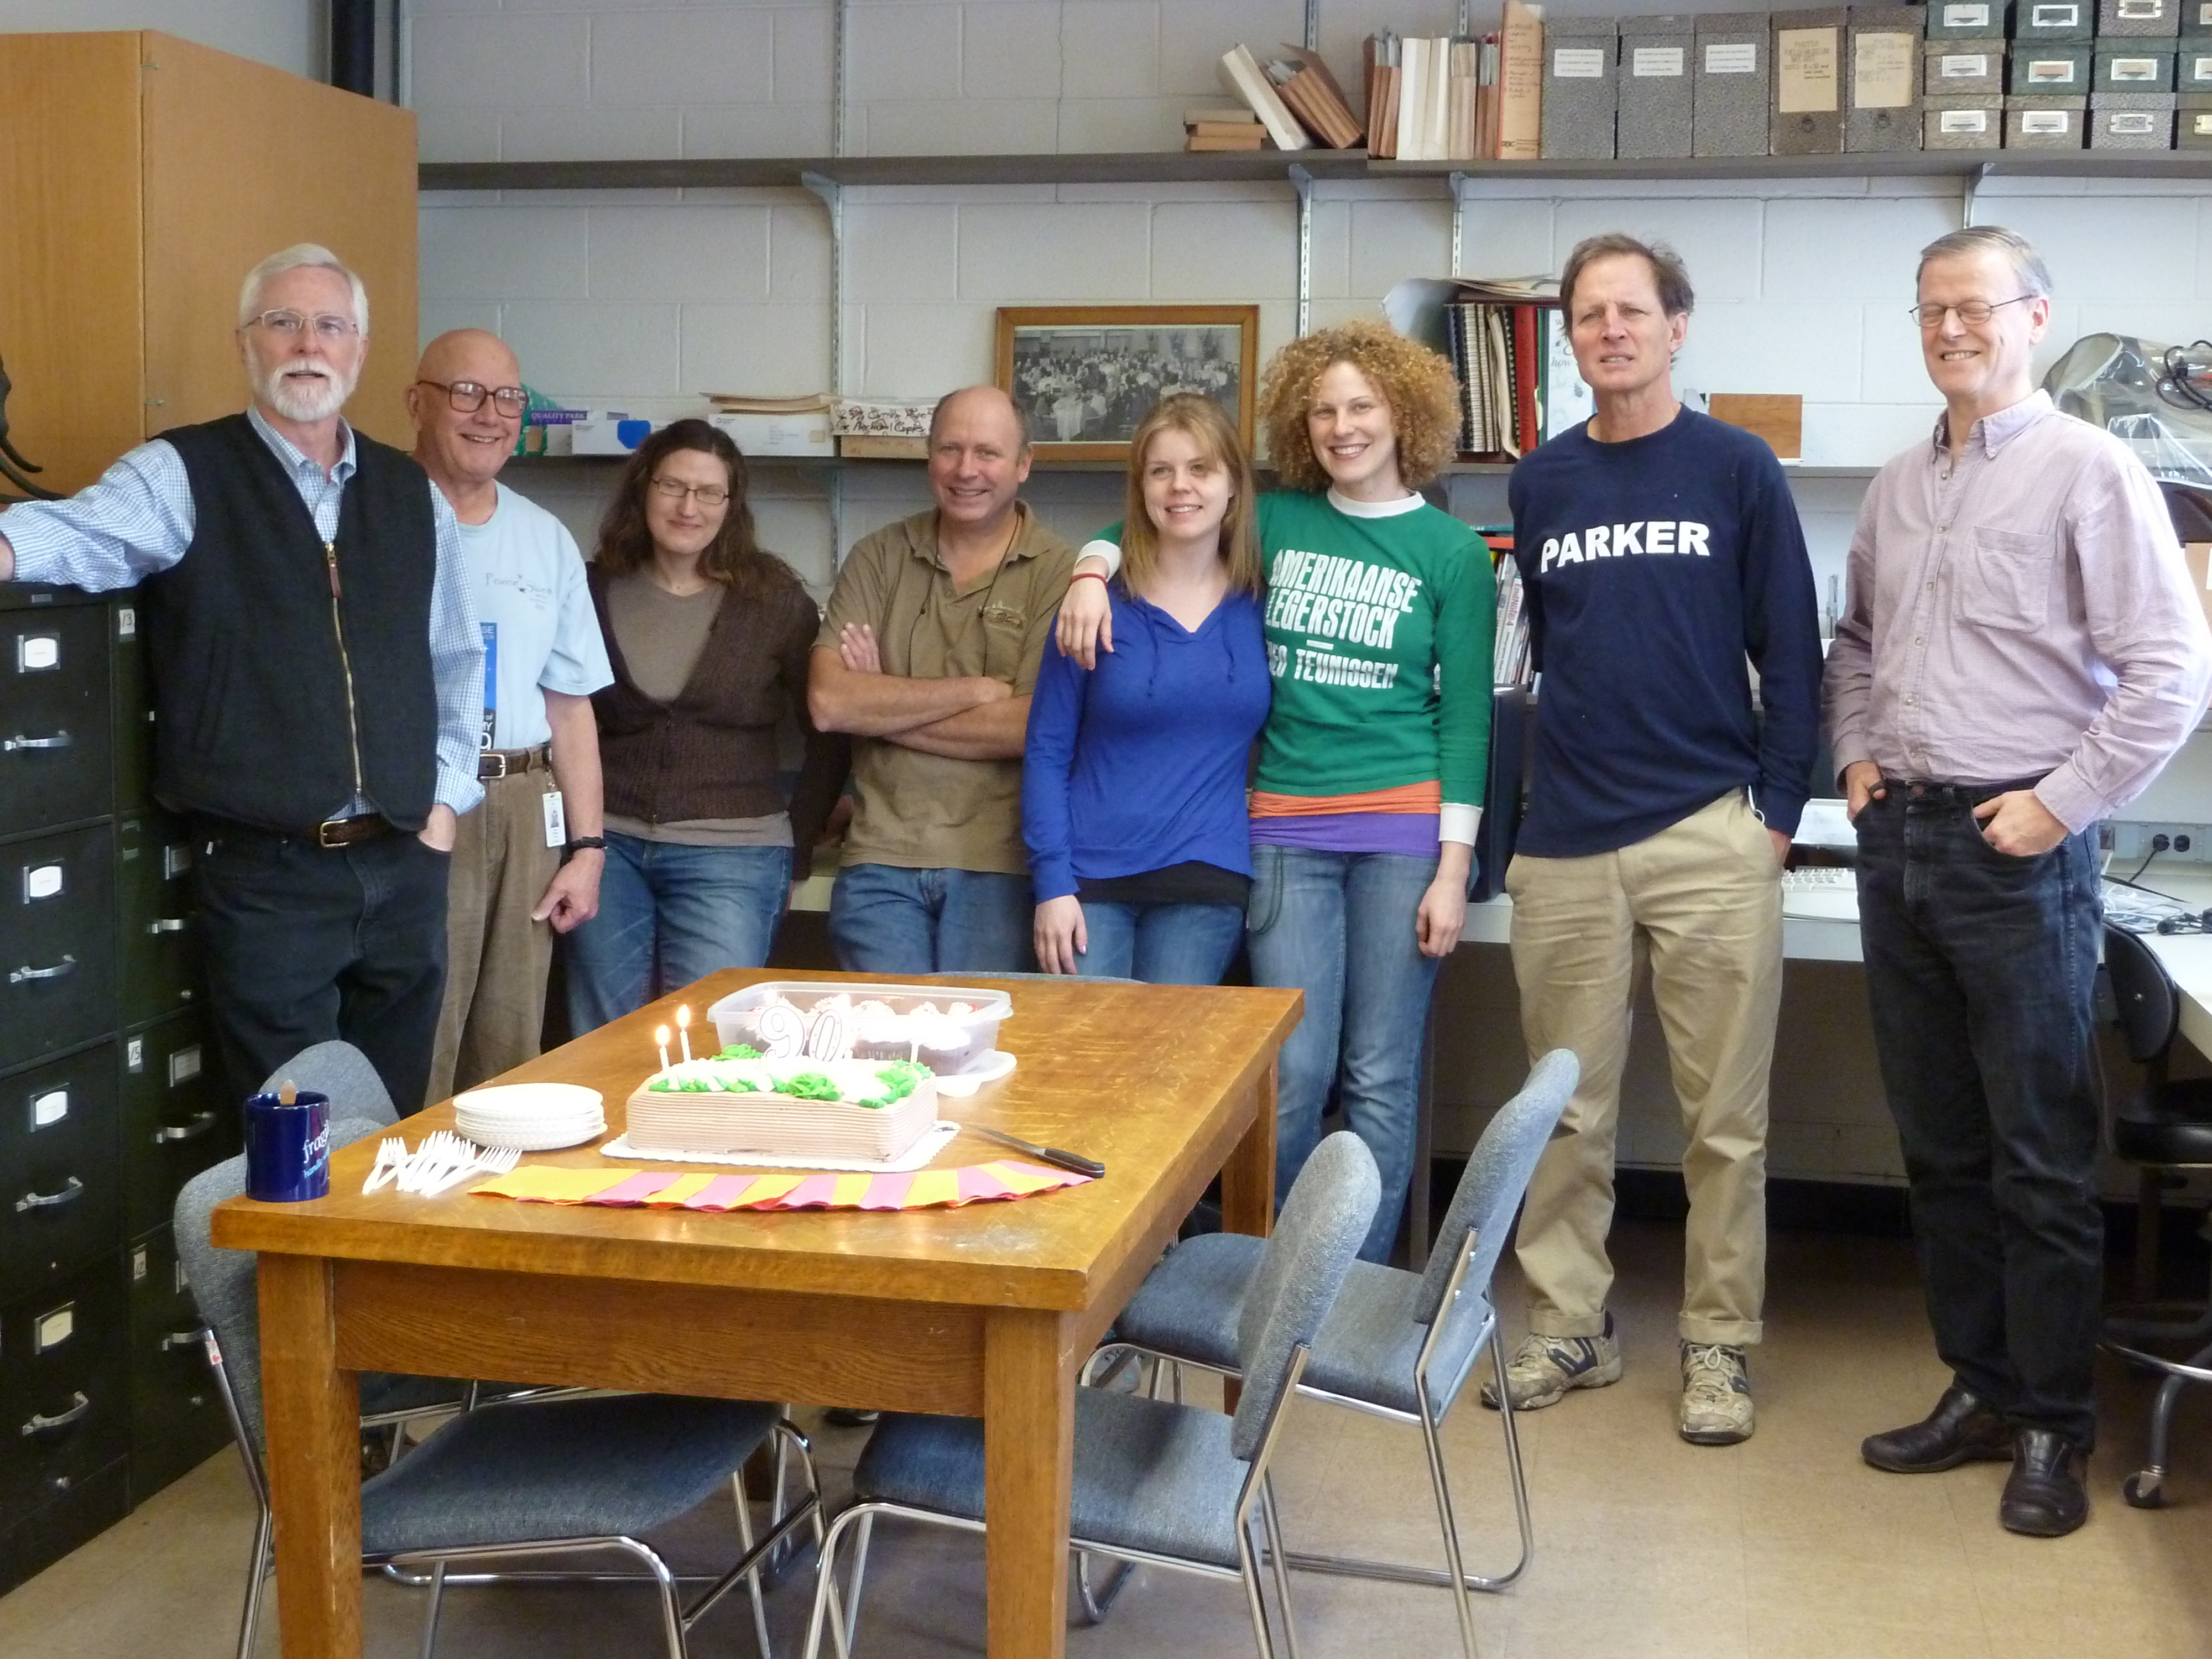 The Field Museum mammalogy team celebrating five December 2011 birthdays—on Bill’s actual birthday (Dec. 13). Left to right: Larry Heaney, John Phelps, Rebecca Banasiak, Bill, Andria Niedzielski, Anna Goldman, Julian Kerbis, and Bruce Patterson. Courtesy of Mary Anne Rogers.